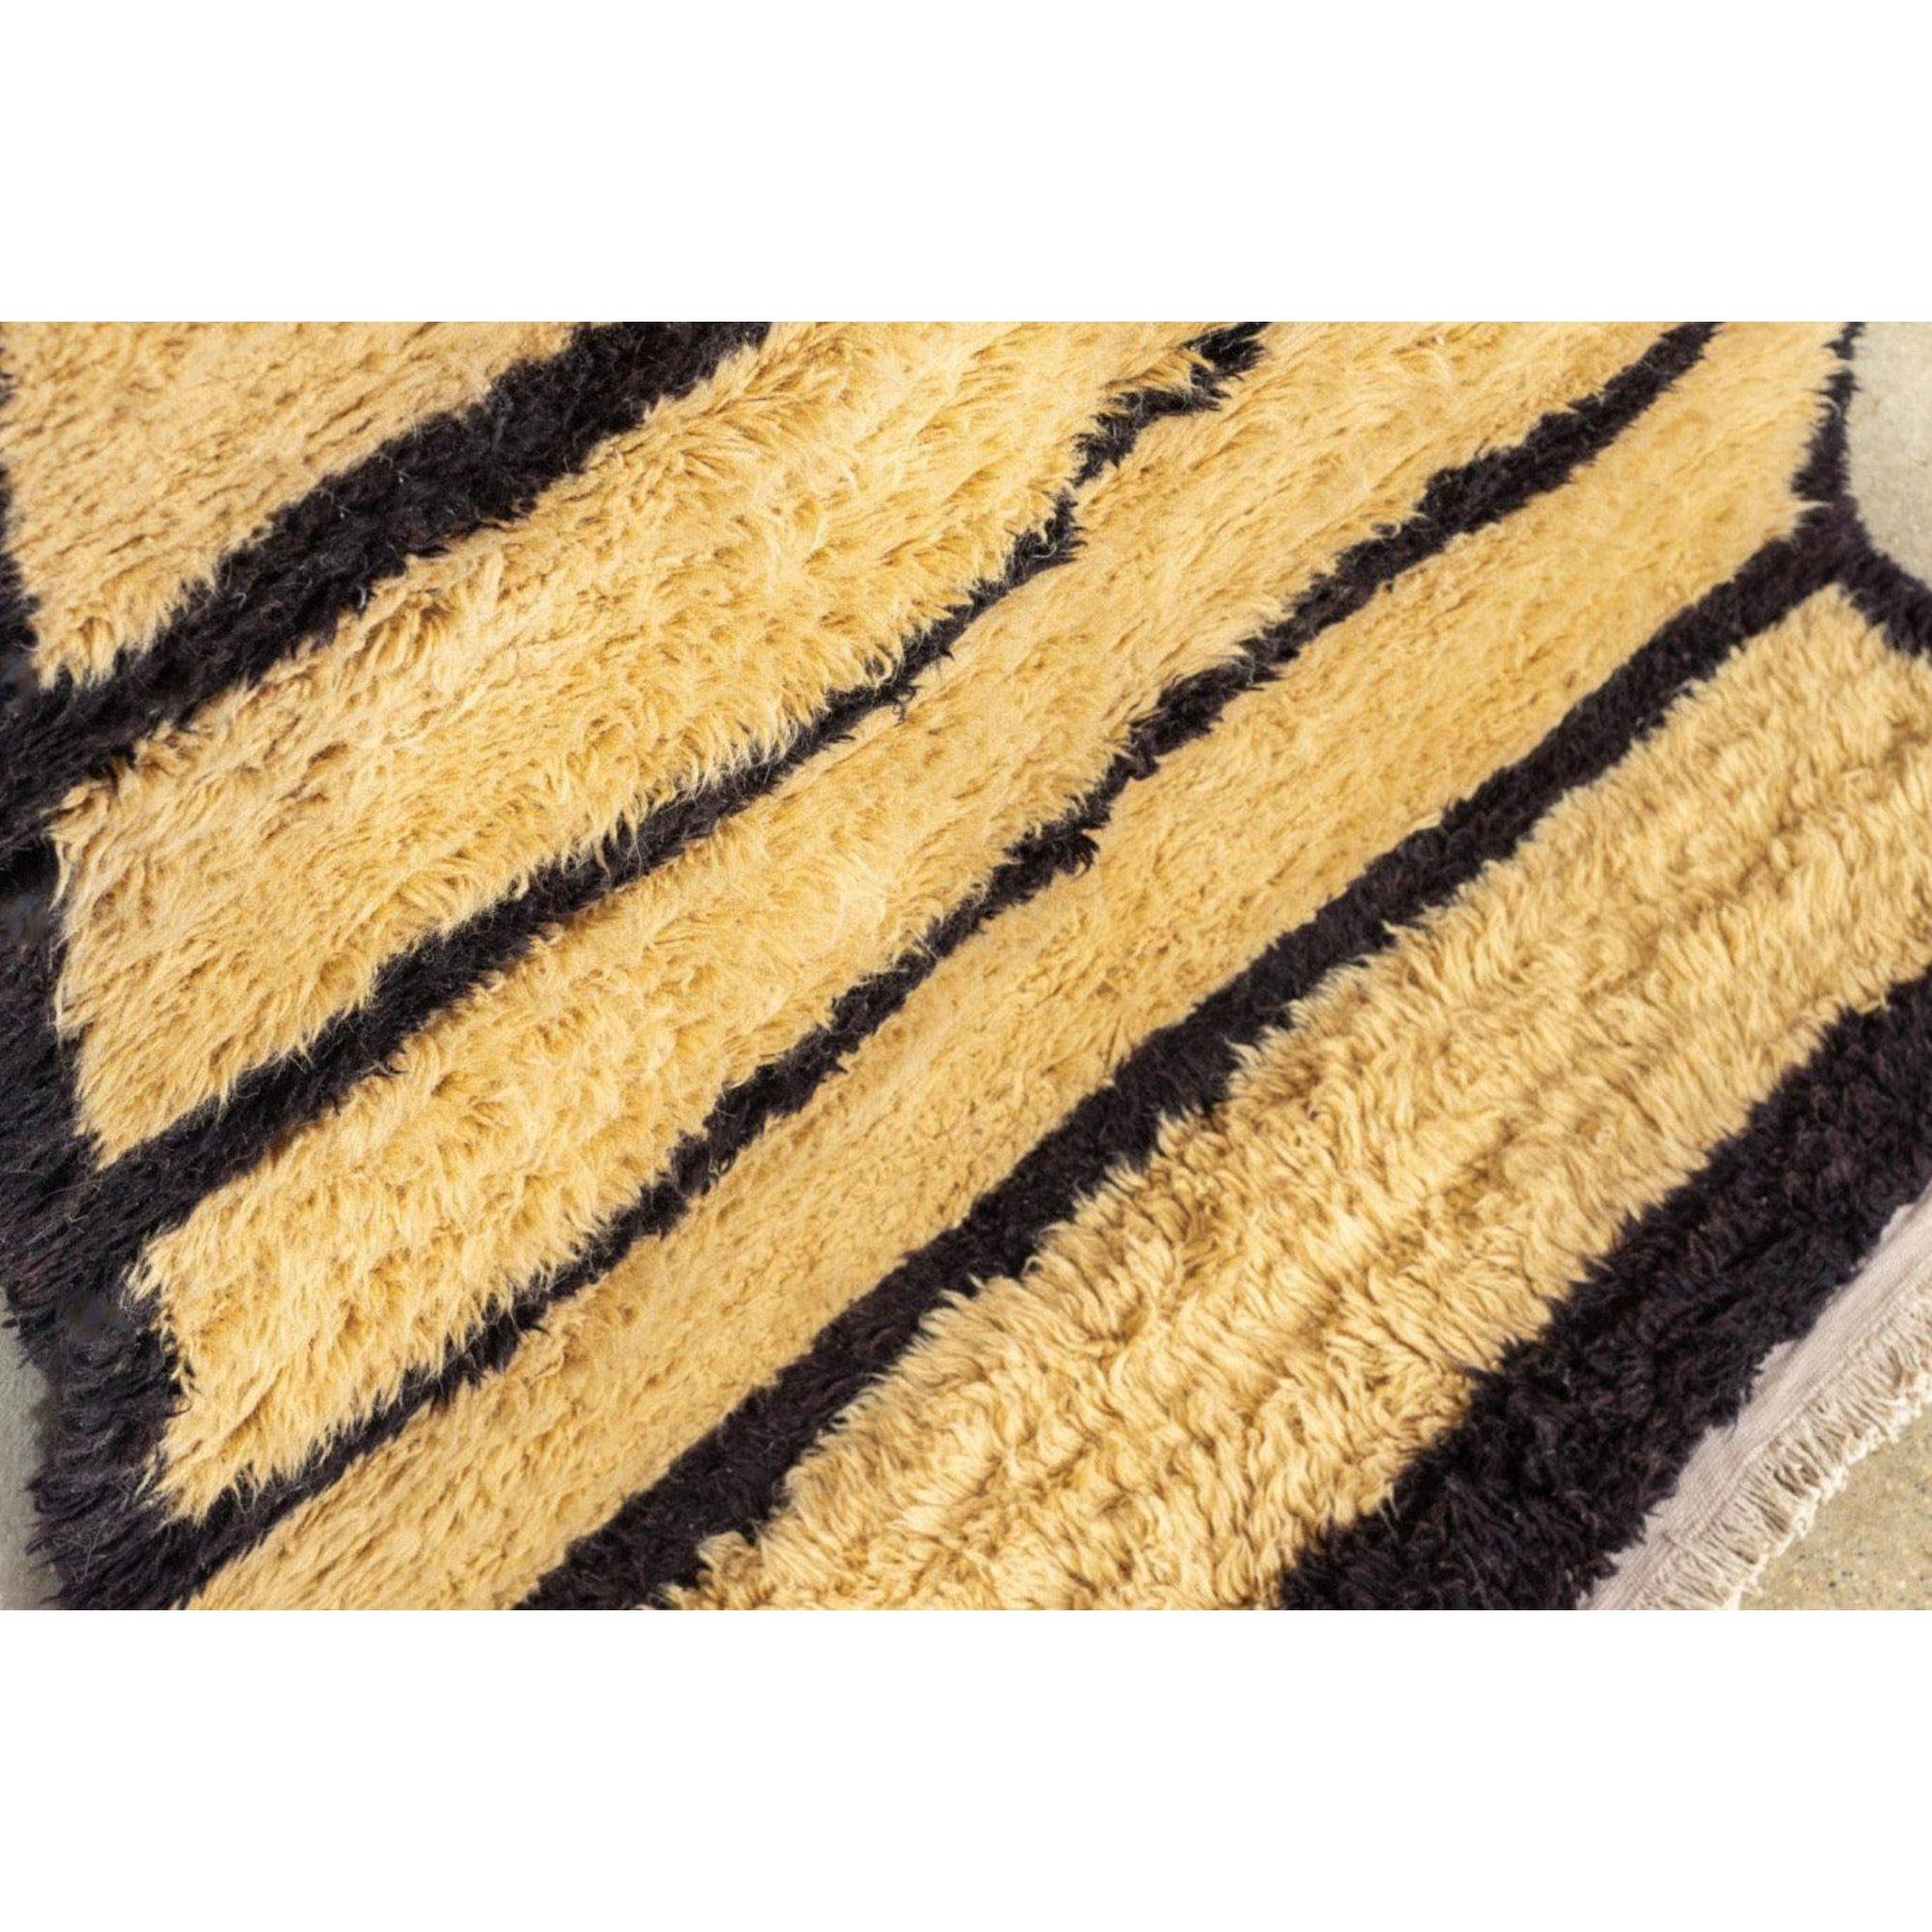 Vintage Turkish Floor Rug in Beige and Black Striped Shaggy Wool For Sale 2